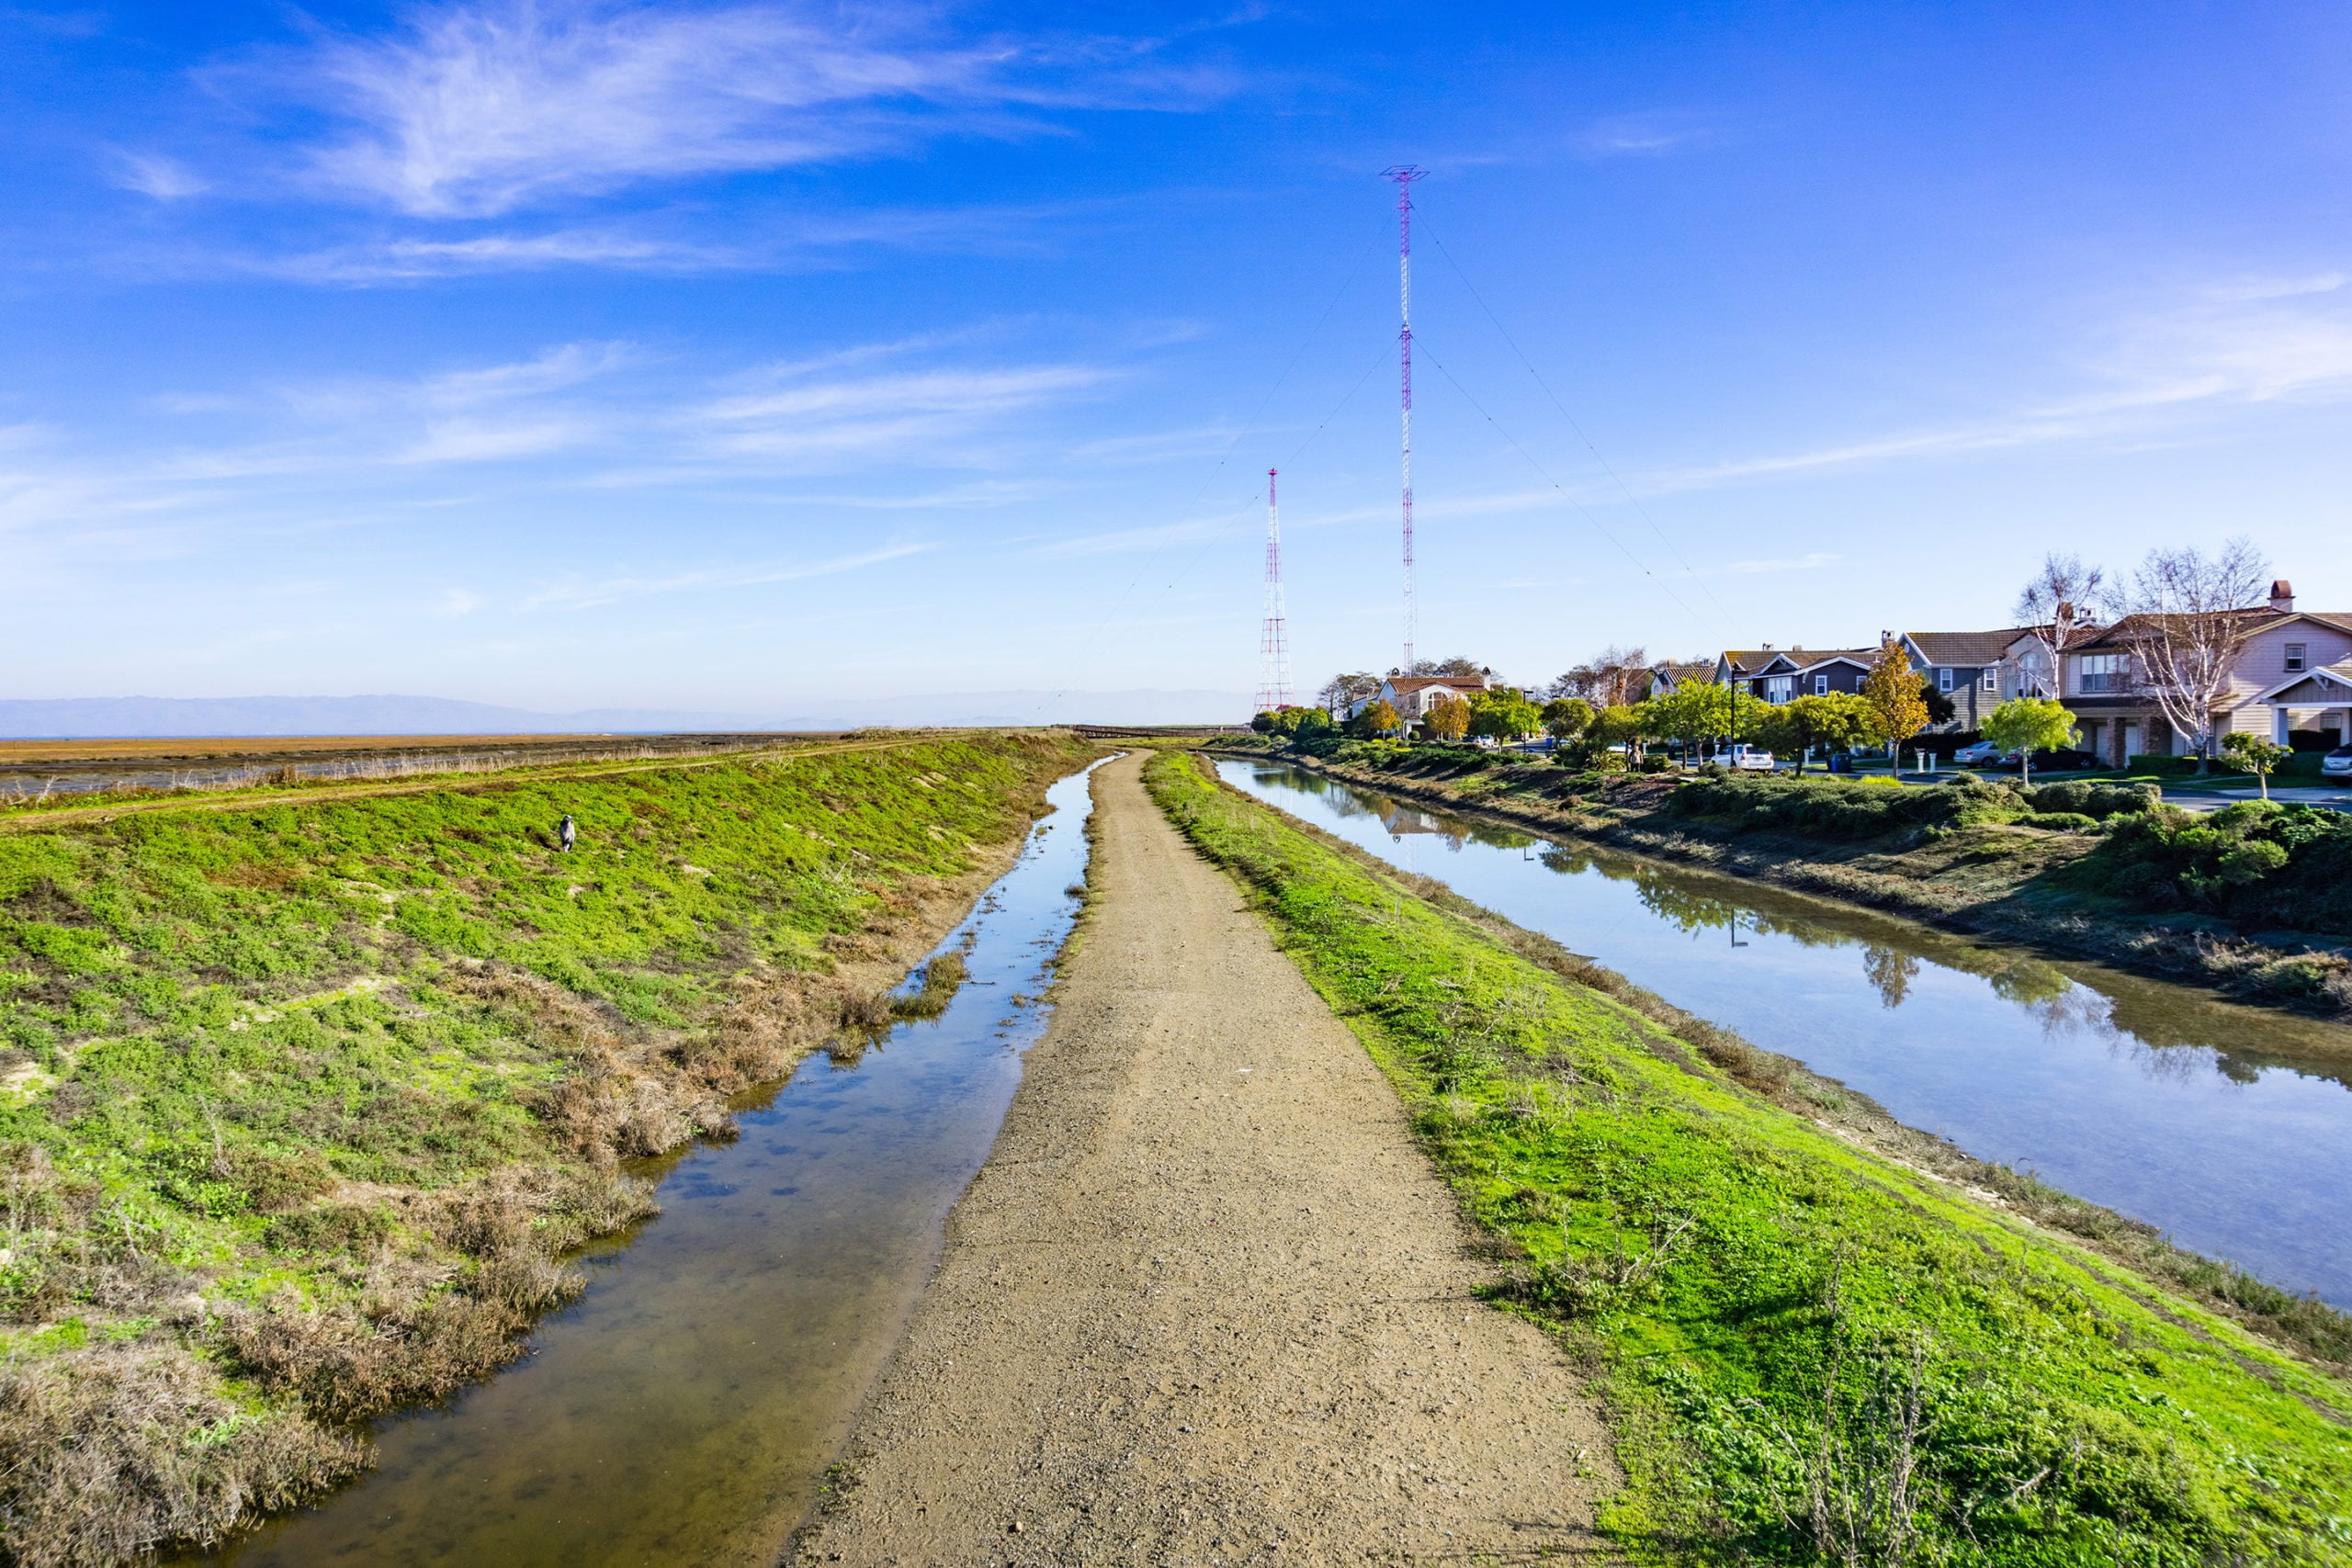 New Institutional Stormwater Permitting Requirements for California Watersheds